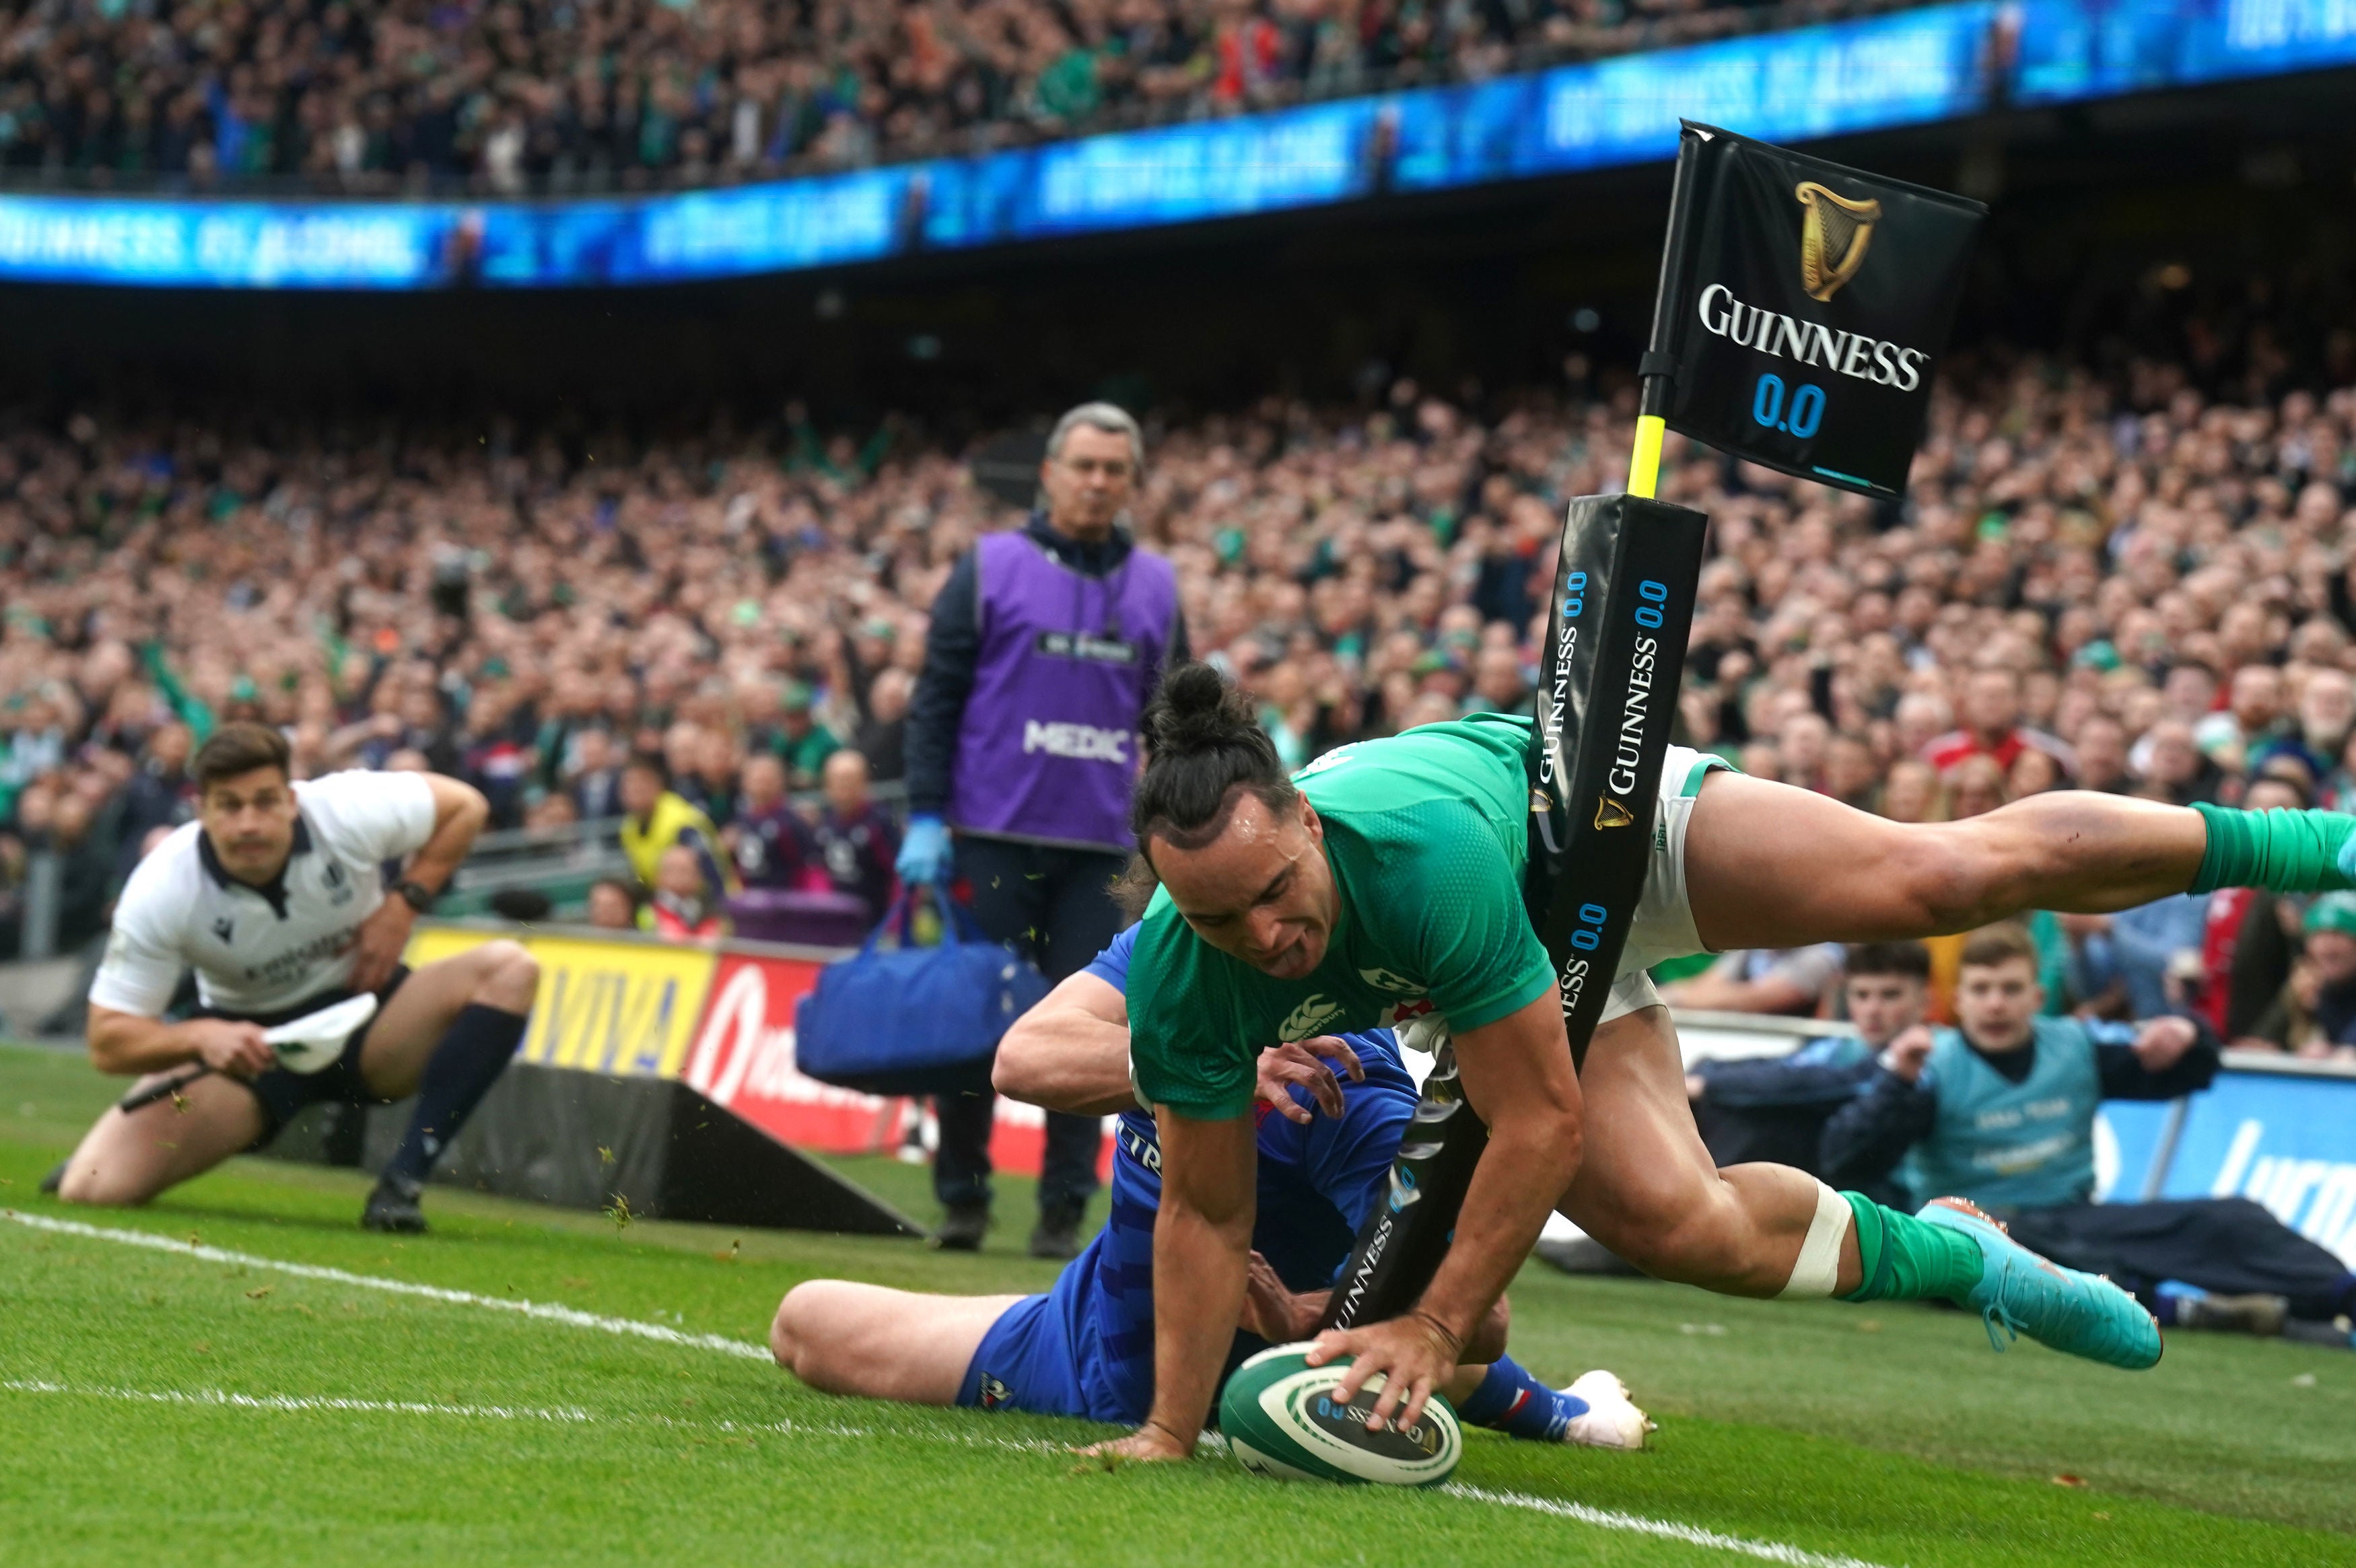 James Lowe scored a hugely acrobatic try to help put Ireland on top